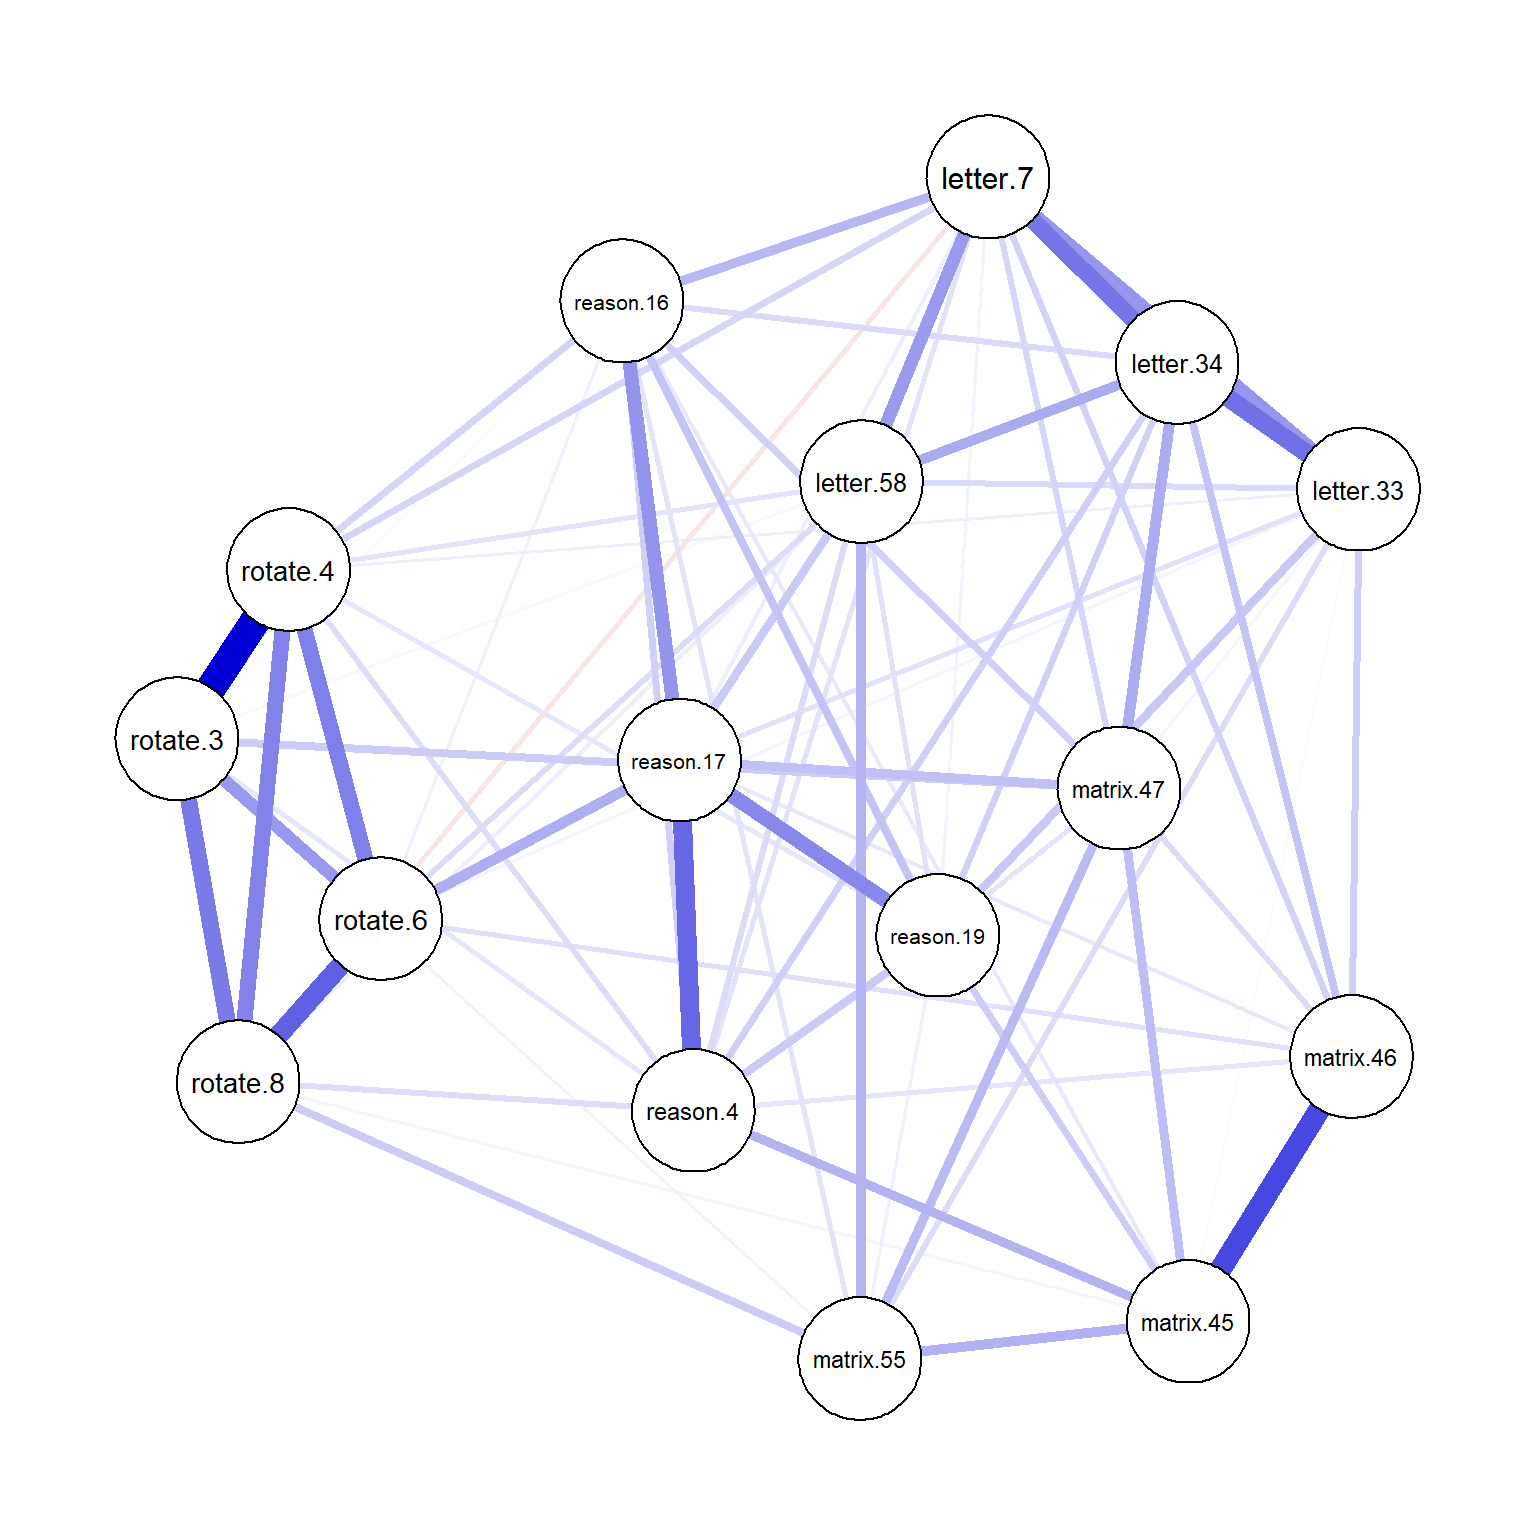 Network plot for the GGM after tuning